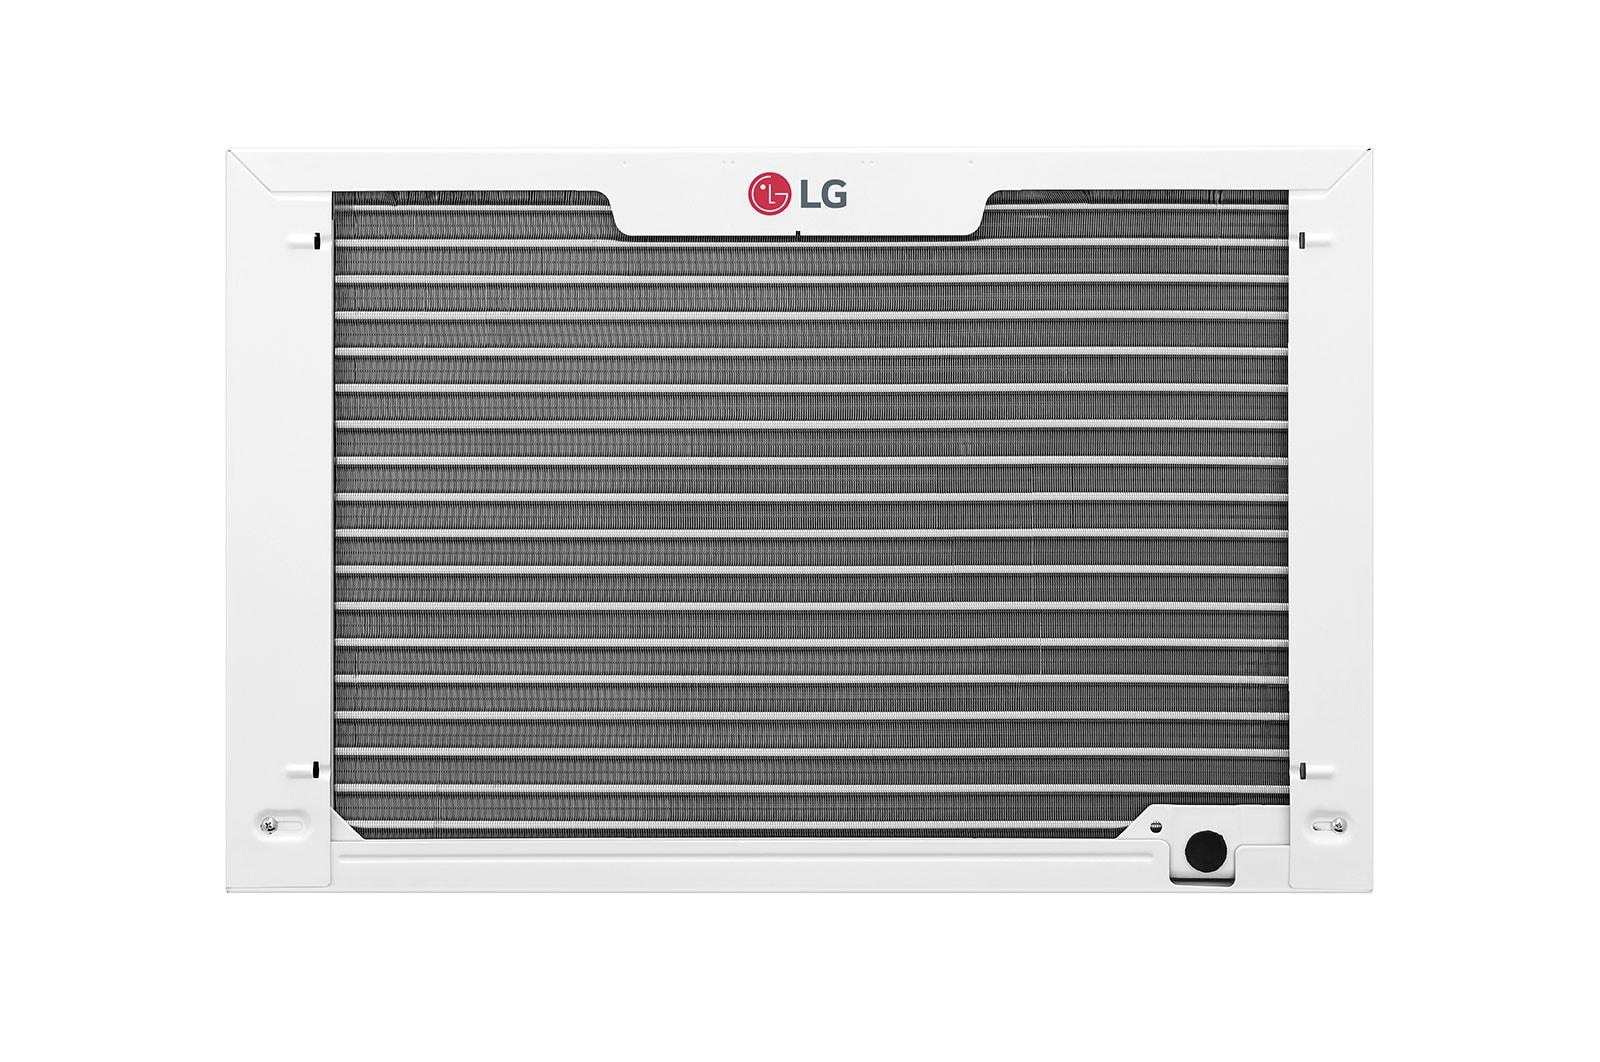 Lg 23,000 BTU Smart Wi-Fi Enabled Window Air Conditioner, Cooling